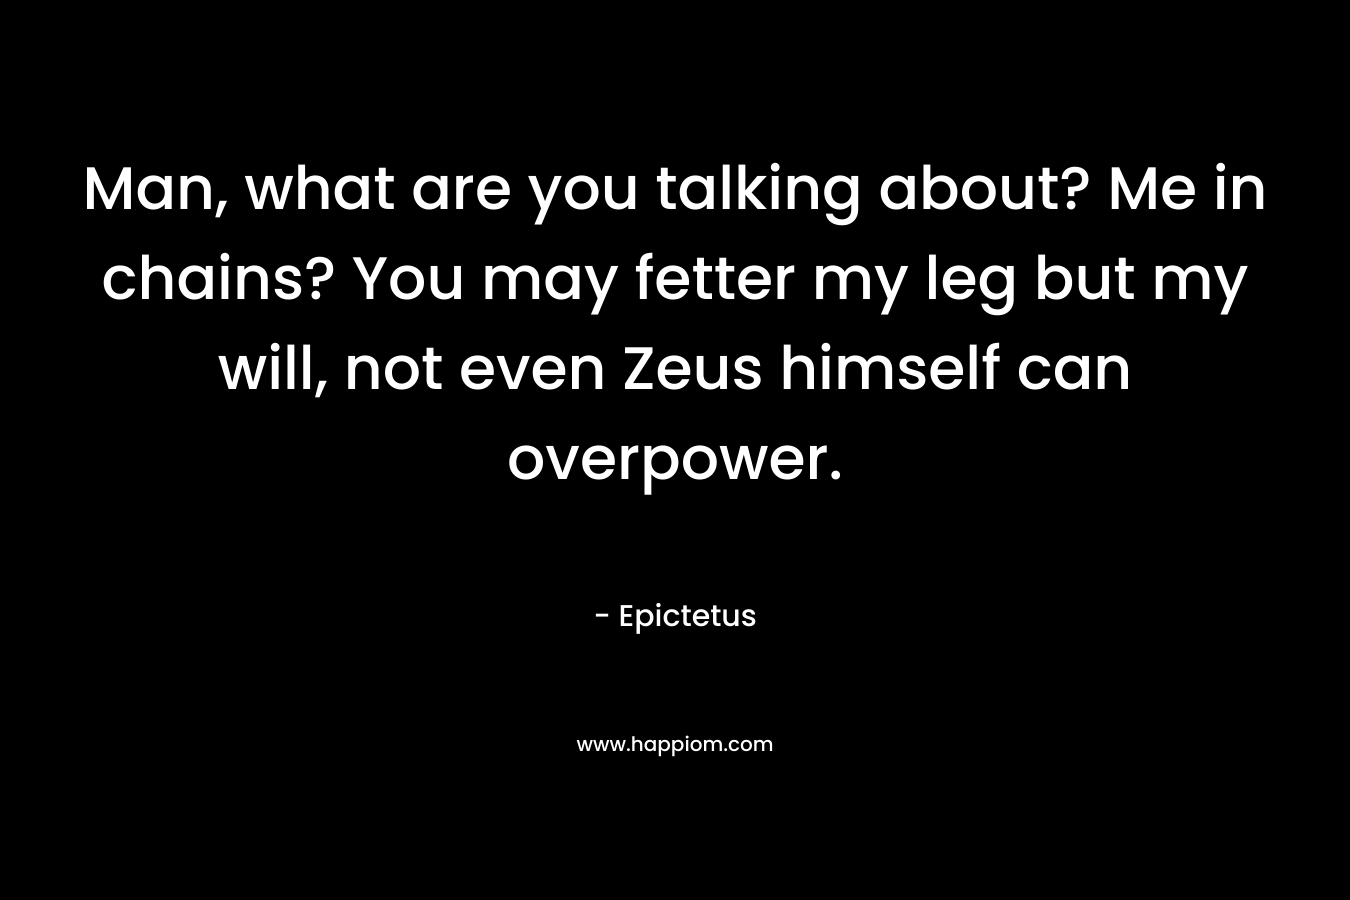 Man, what are you talking about? Me in chains? You may fetter my leg but my will, not even Zeus himself can overpower. – Epictetus